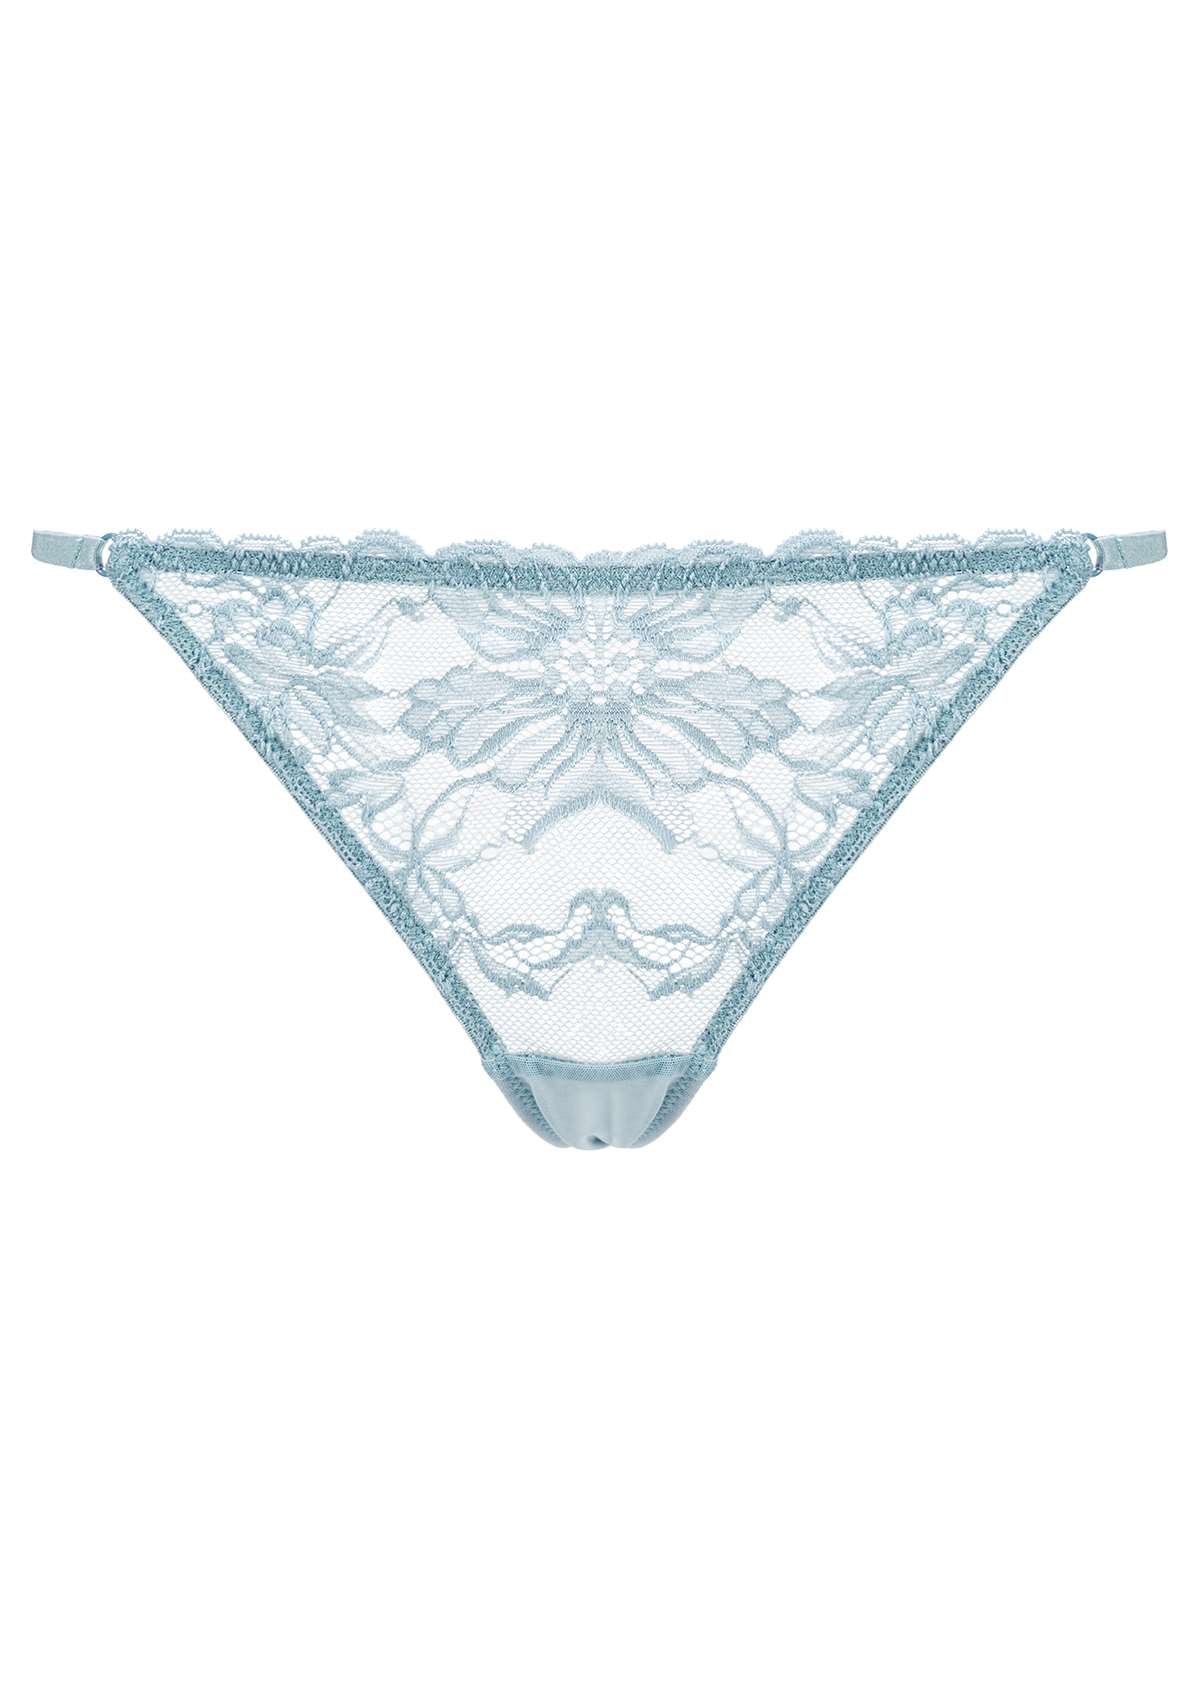 HSIA Pretty In Petals: 3-Pack Of Sexy Floral Chic Lace String Thongs - L / Light Coral+Dusty Peach+Pewter Blue